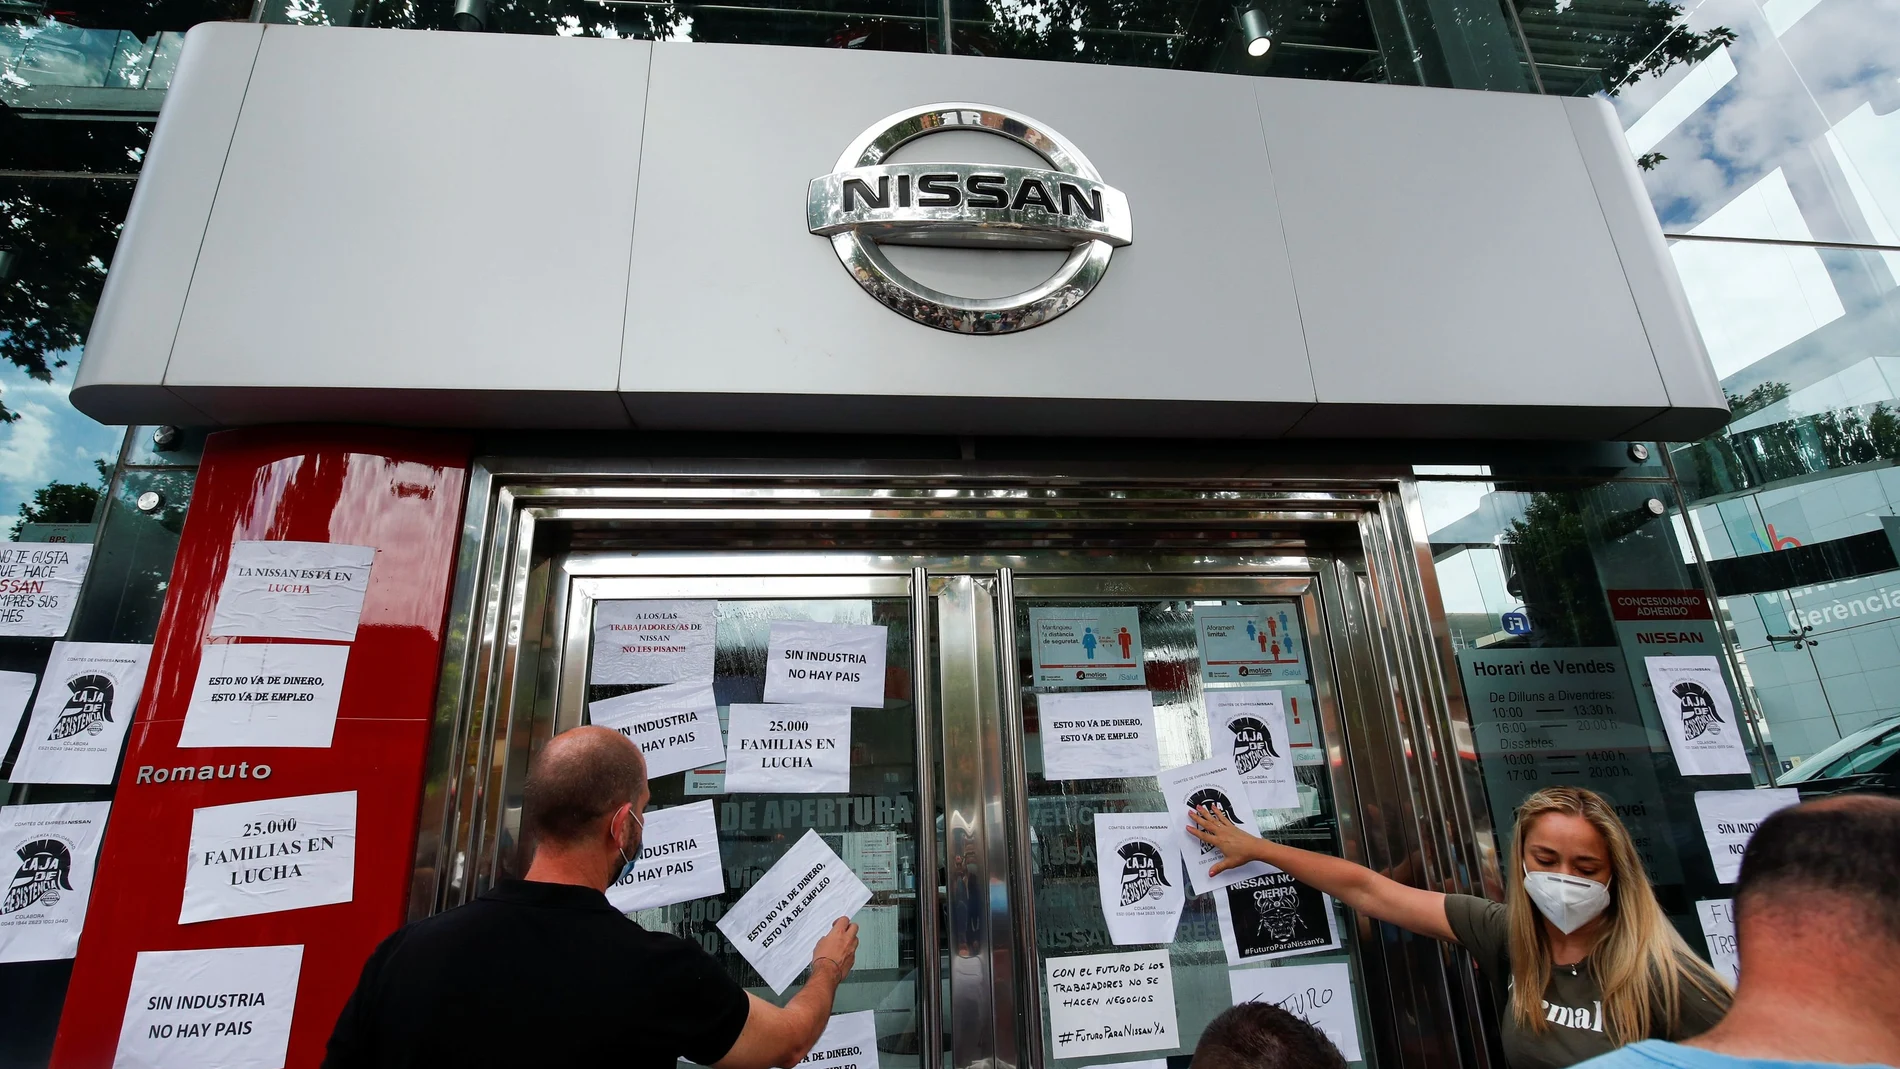 Protest against the closure of the Nissan factory in Barcelona